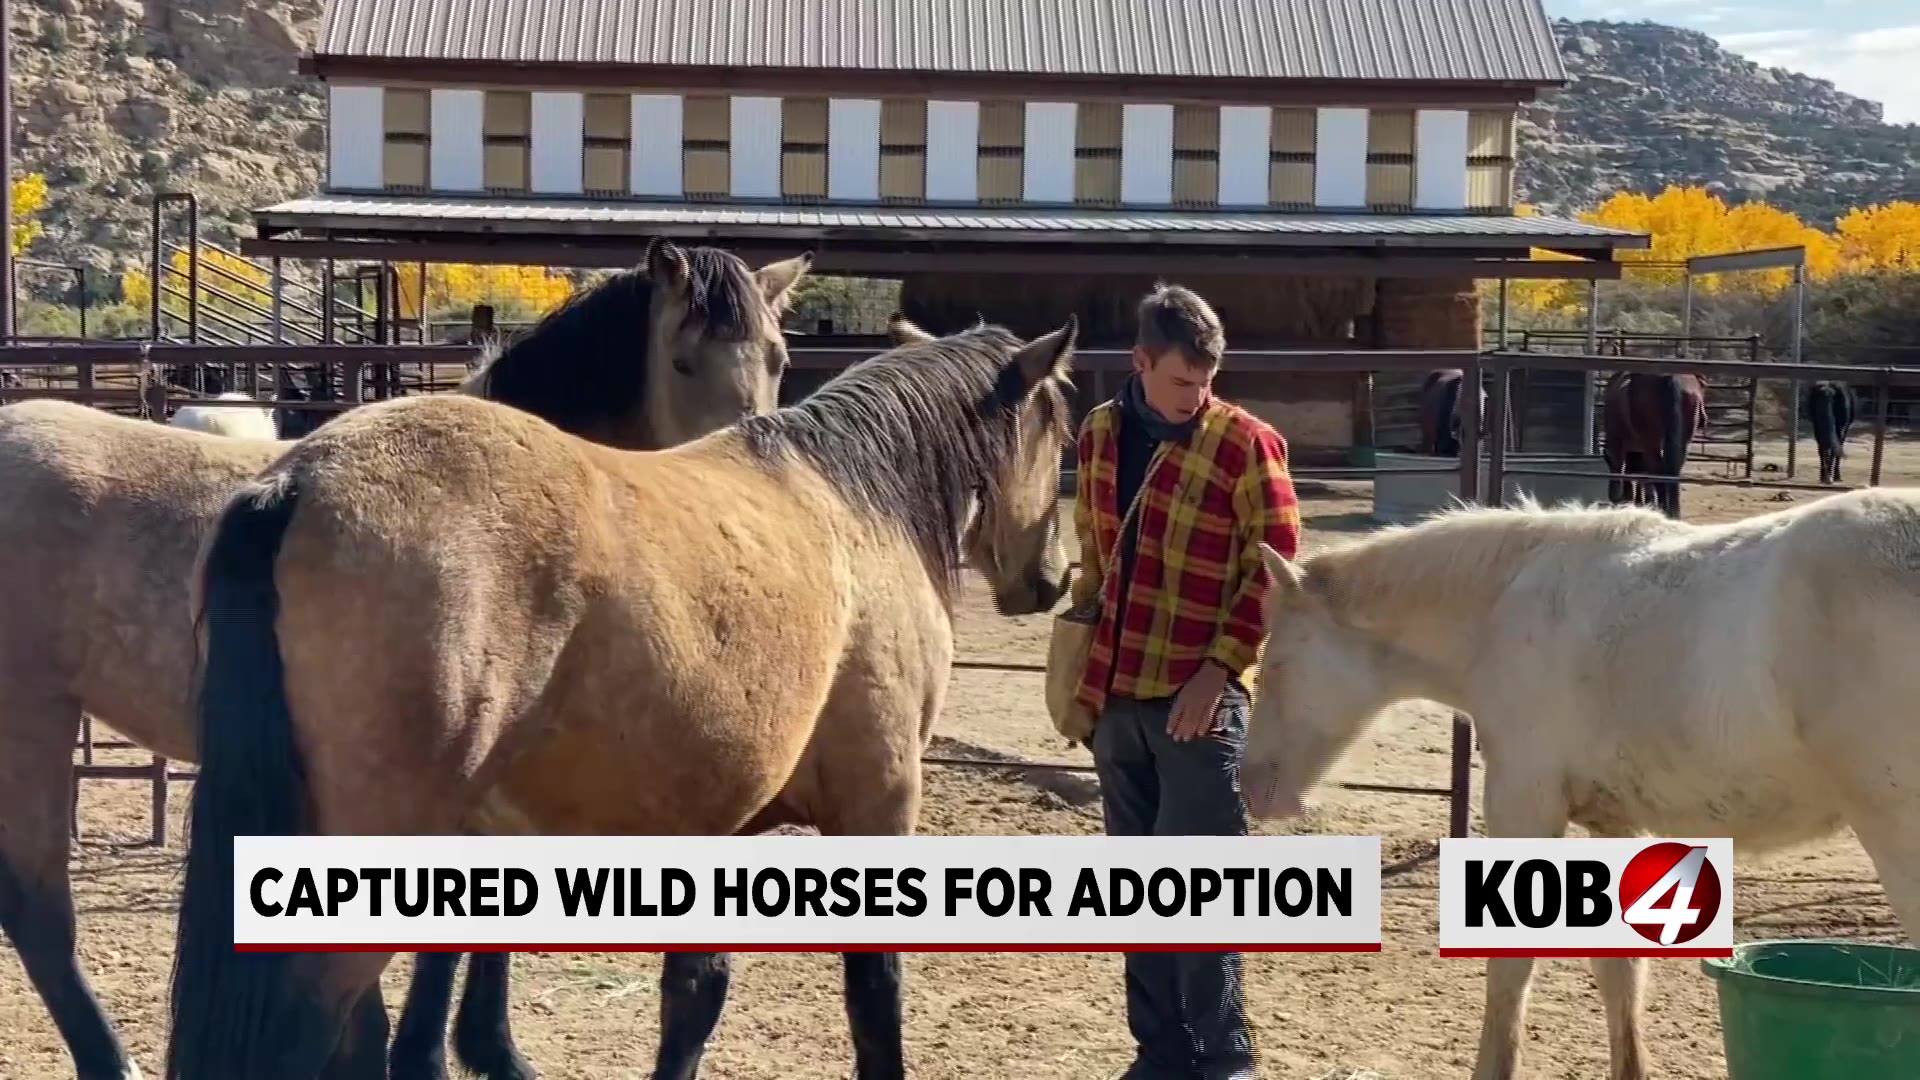 Wild horses from Mesa Verde National Park arrive at New Mexico Animal Shelter